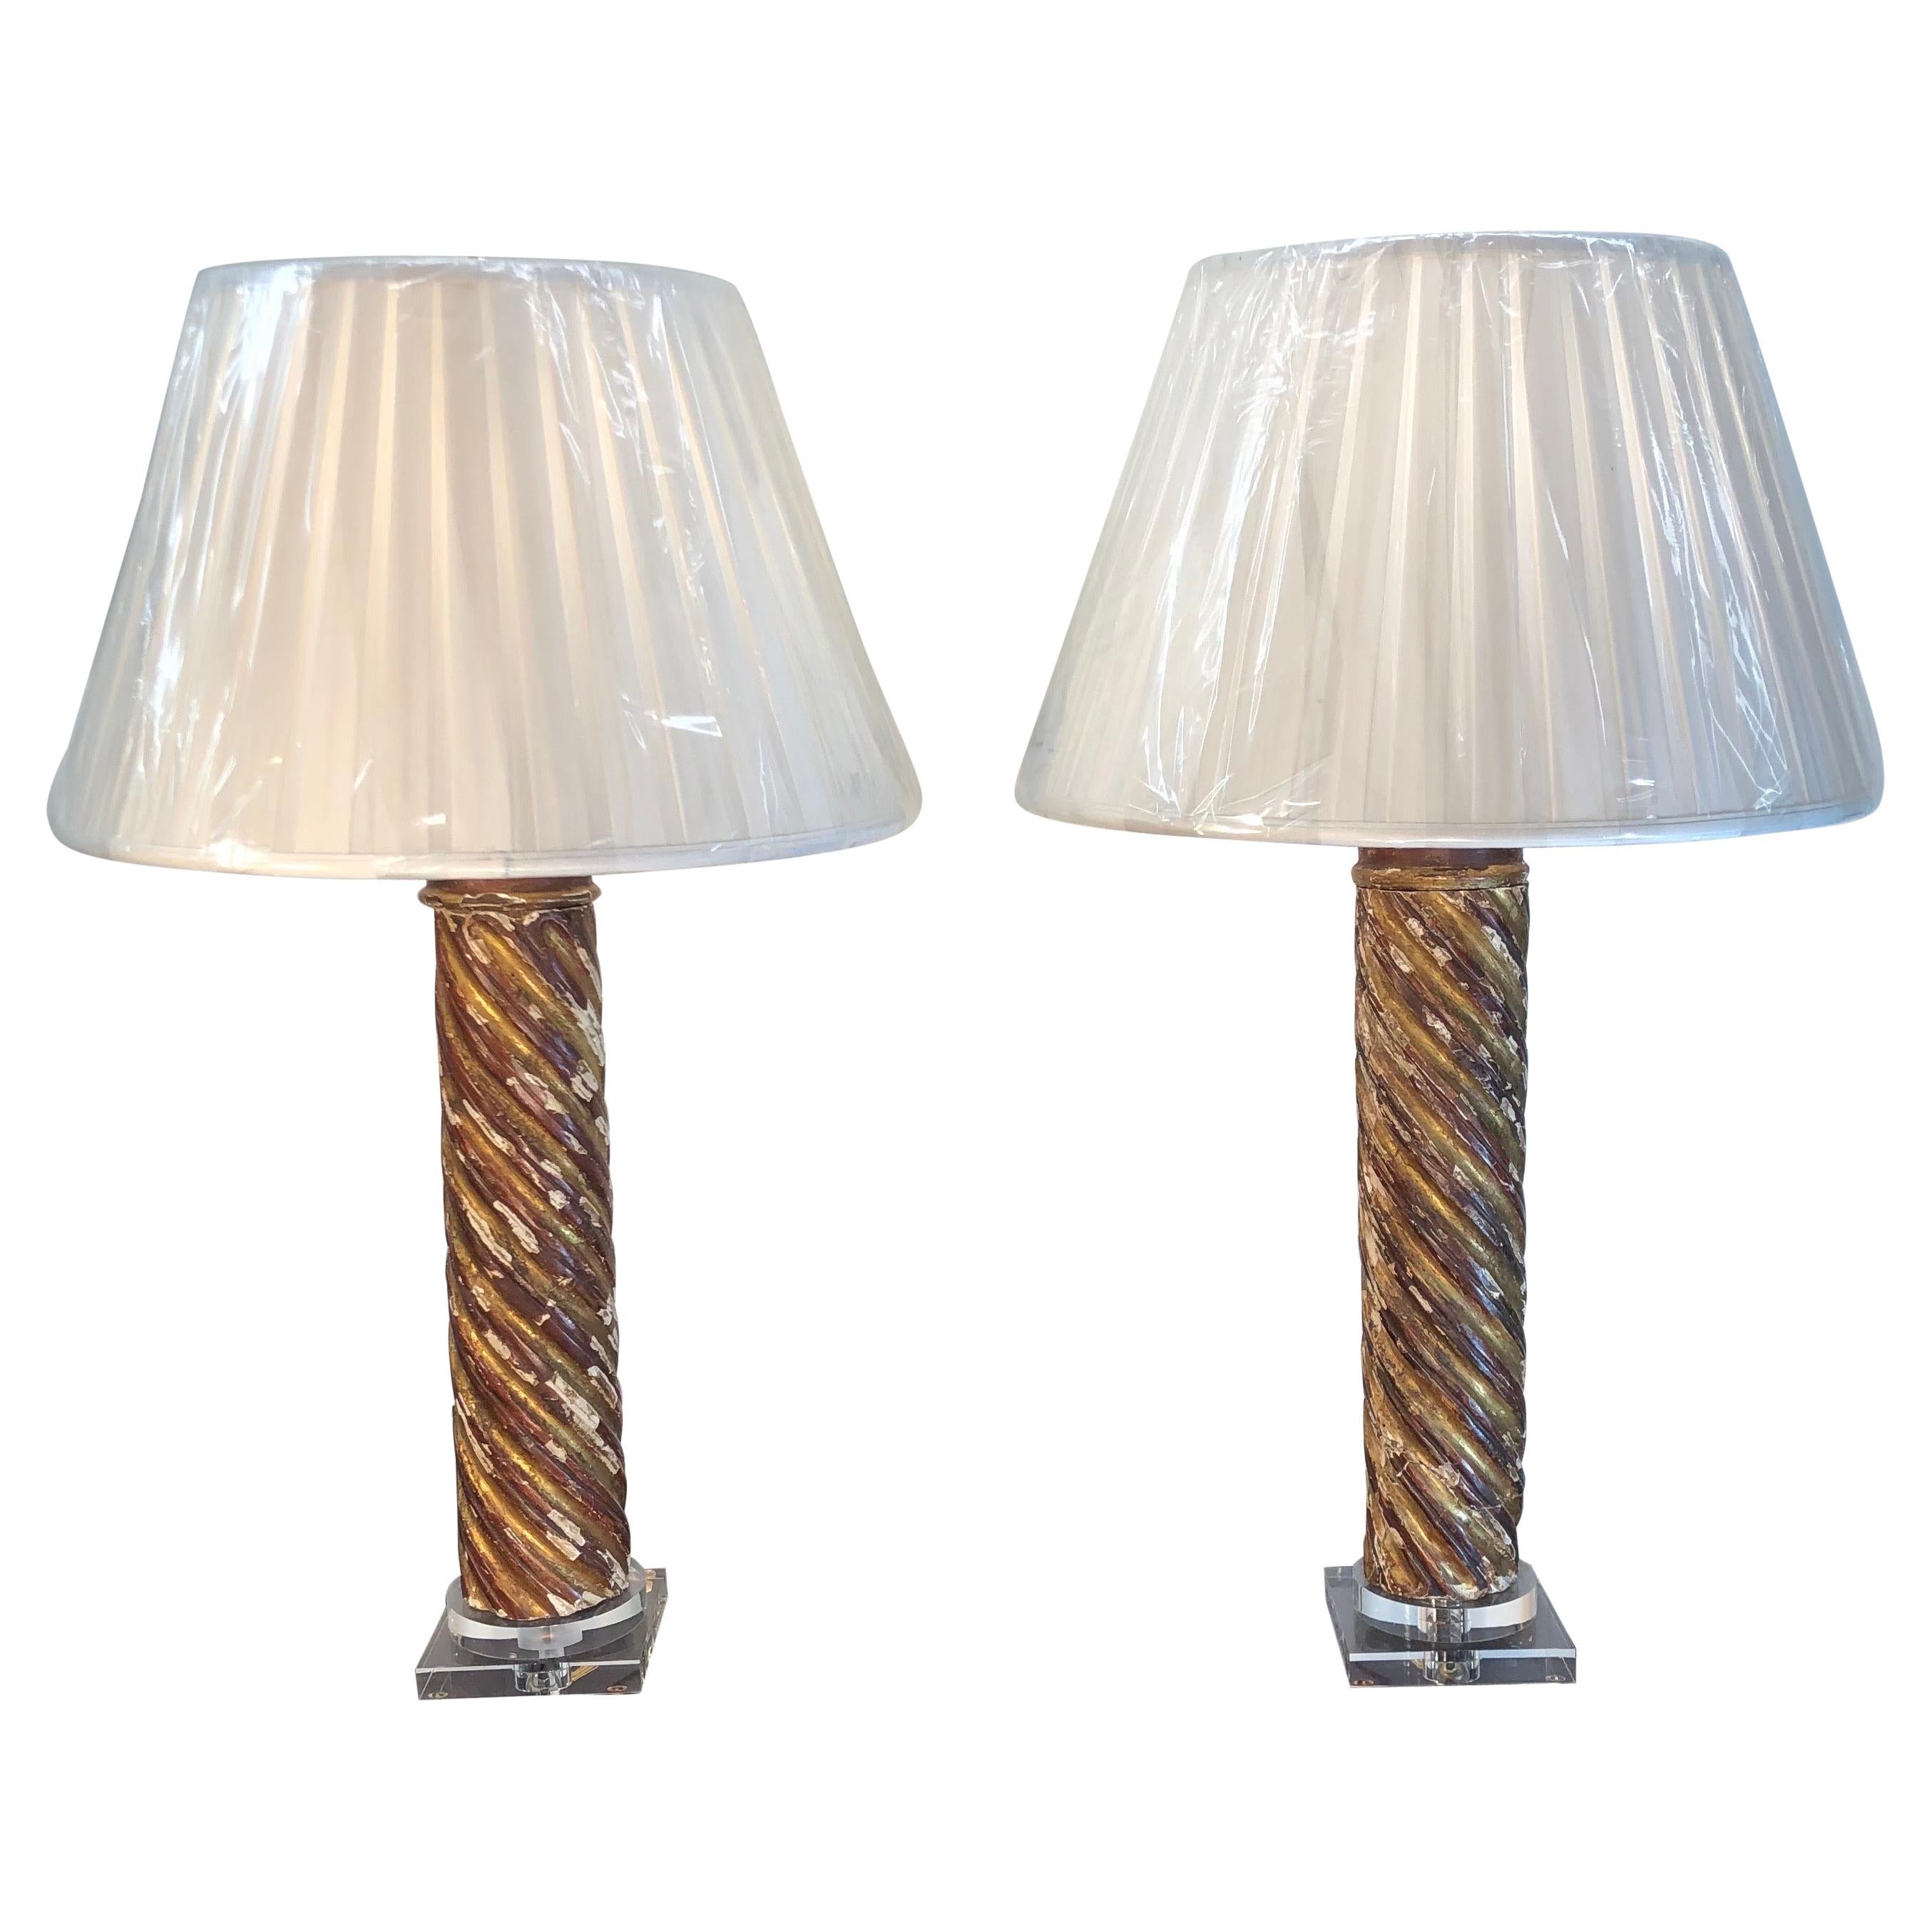 Pair of Mid-18th Century Italian Giltwood Column Lamps For Sale